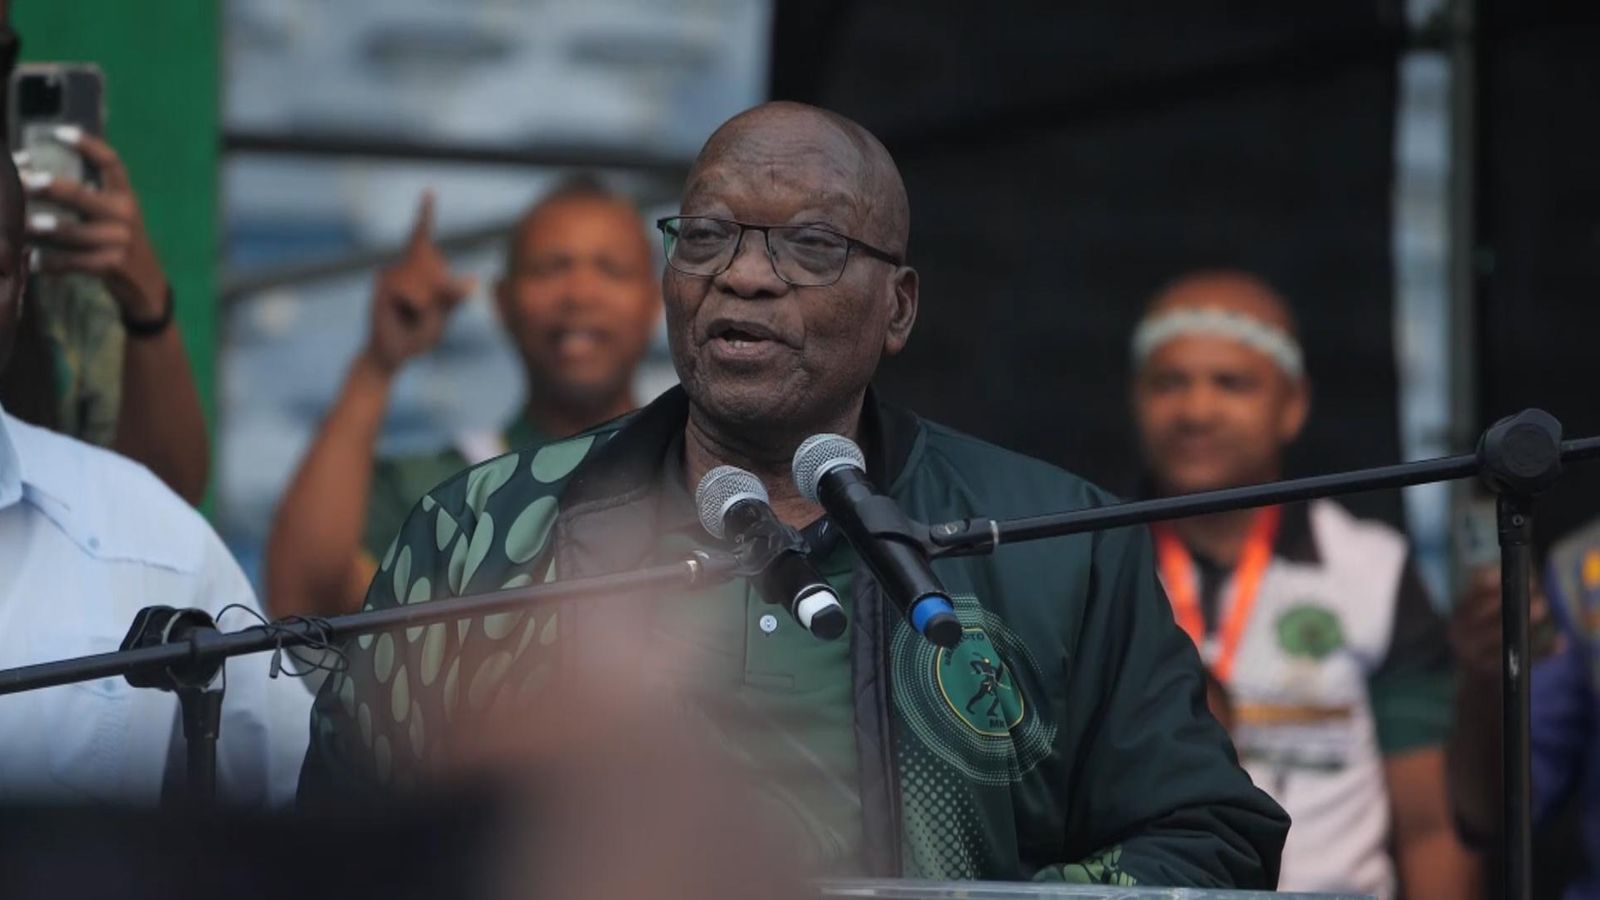 Thousands flock to see former South African president as he turns against former party